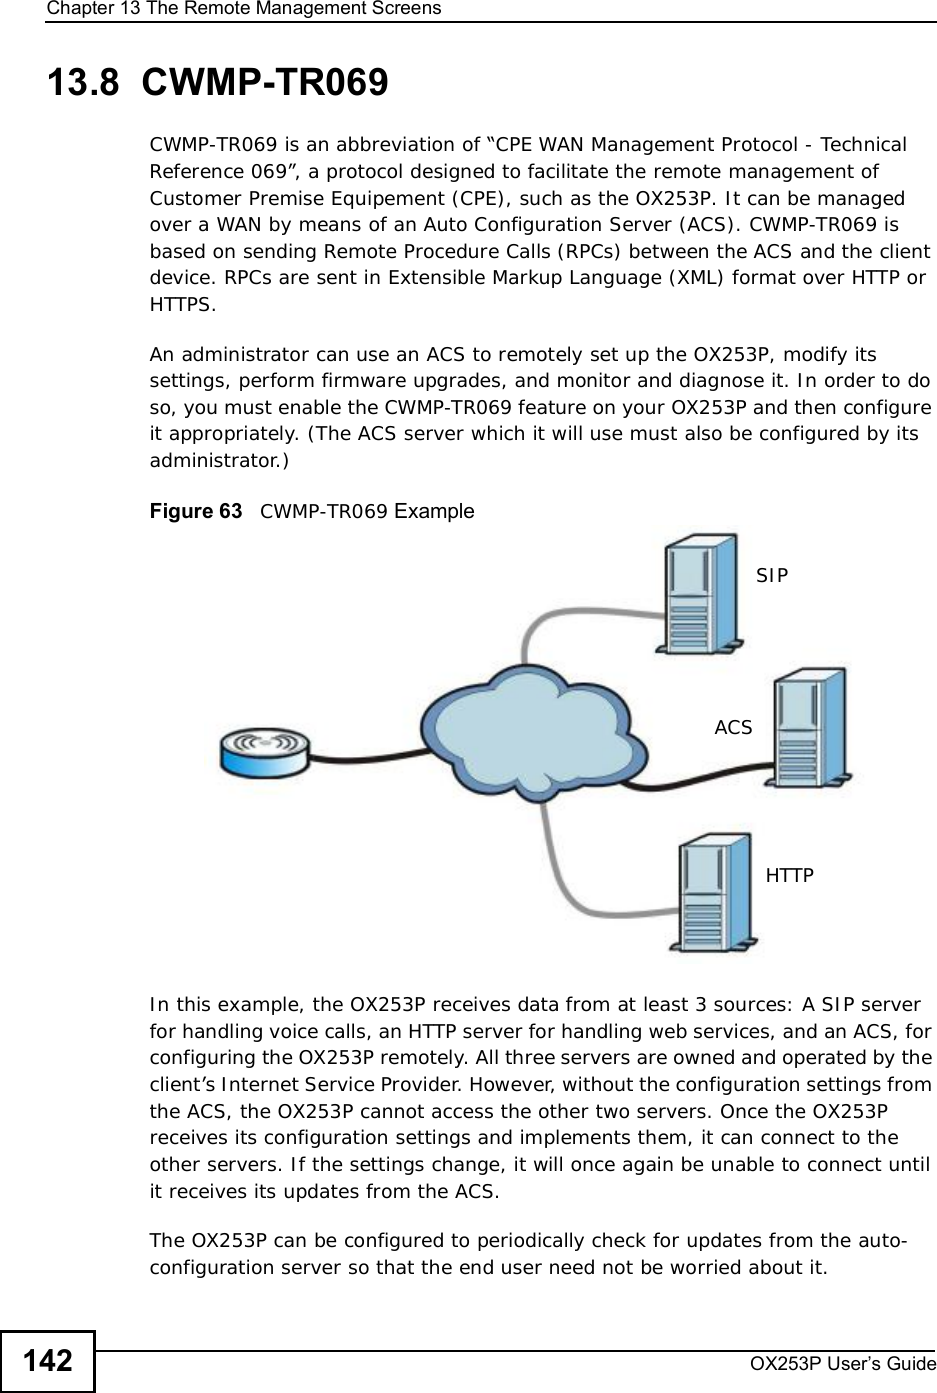 Chapter 13The Remote Management ScreensOX253P User’s Guide14213.8  CWMP-TR069CWMP-TR069 is an abbreviation of “CPE WAN Management Protocol - Technical Reference 069”, a protocol designed to facilitate the remote management of Customer Premise Equipement (CPE), such as the OX253P. It can be managed over a WAN by means of an Auto Configuration Server (ACS). CWMP-TR069 is based on sending Remote Procedure Calls (RPCs) between the ACS and the client device. RPCs are sent in Extensible Markup Language (XML) format over HTTP or HTTPS.An administrator can use an ACS to remotely set up the OX253P, modify its settings, perform firmware upgrades, and monitor and diagnose it. In order to do so, you must enable the CWMP-TR069 feature on your OX253P and then configure it appropriately. (The ACS server which it will use must also be configured by its administrator.)Figure 63   CWMP-TR069 ExampleIn this example, the OX253P receives data from at least 3 sources: A SIP server for handling voice calls, an HTTP server for handling web services, and an ACS, for configuring the OX253P remotely. All three servers are owned and operated by the client’s Internet Service Provider. However, without the configuration settings from the ACS, the OX253P cannot access the other two servers. Once the OX253P receives its configuration settings and implements them, it can connect to the other servers. If the settings change, it will once again be unable to connect until it receives its updates from the ACS.The OX253P can be configured to periodically check for updates from the auto-configuration server so that the end user need not be worried about it.SIPACSHTTP